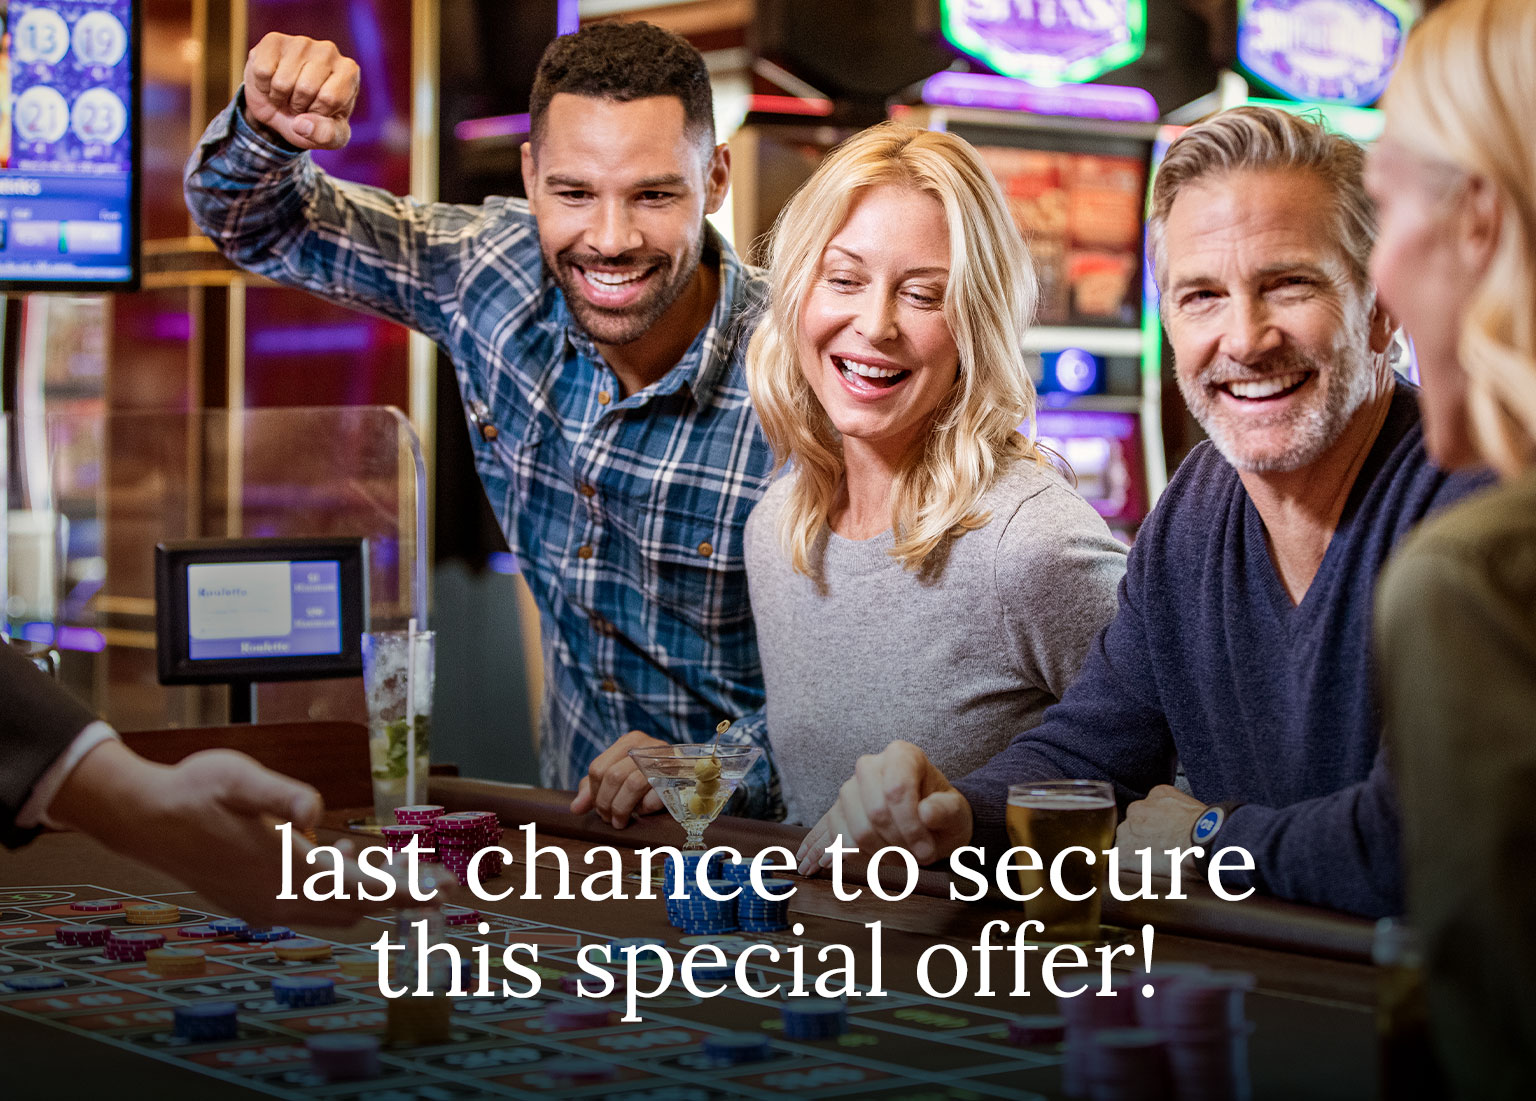 Come Back & Play! Last chance to secure this special offer! - Friends cheer while playing roulette